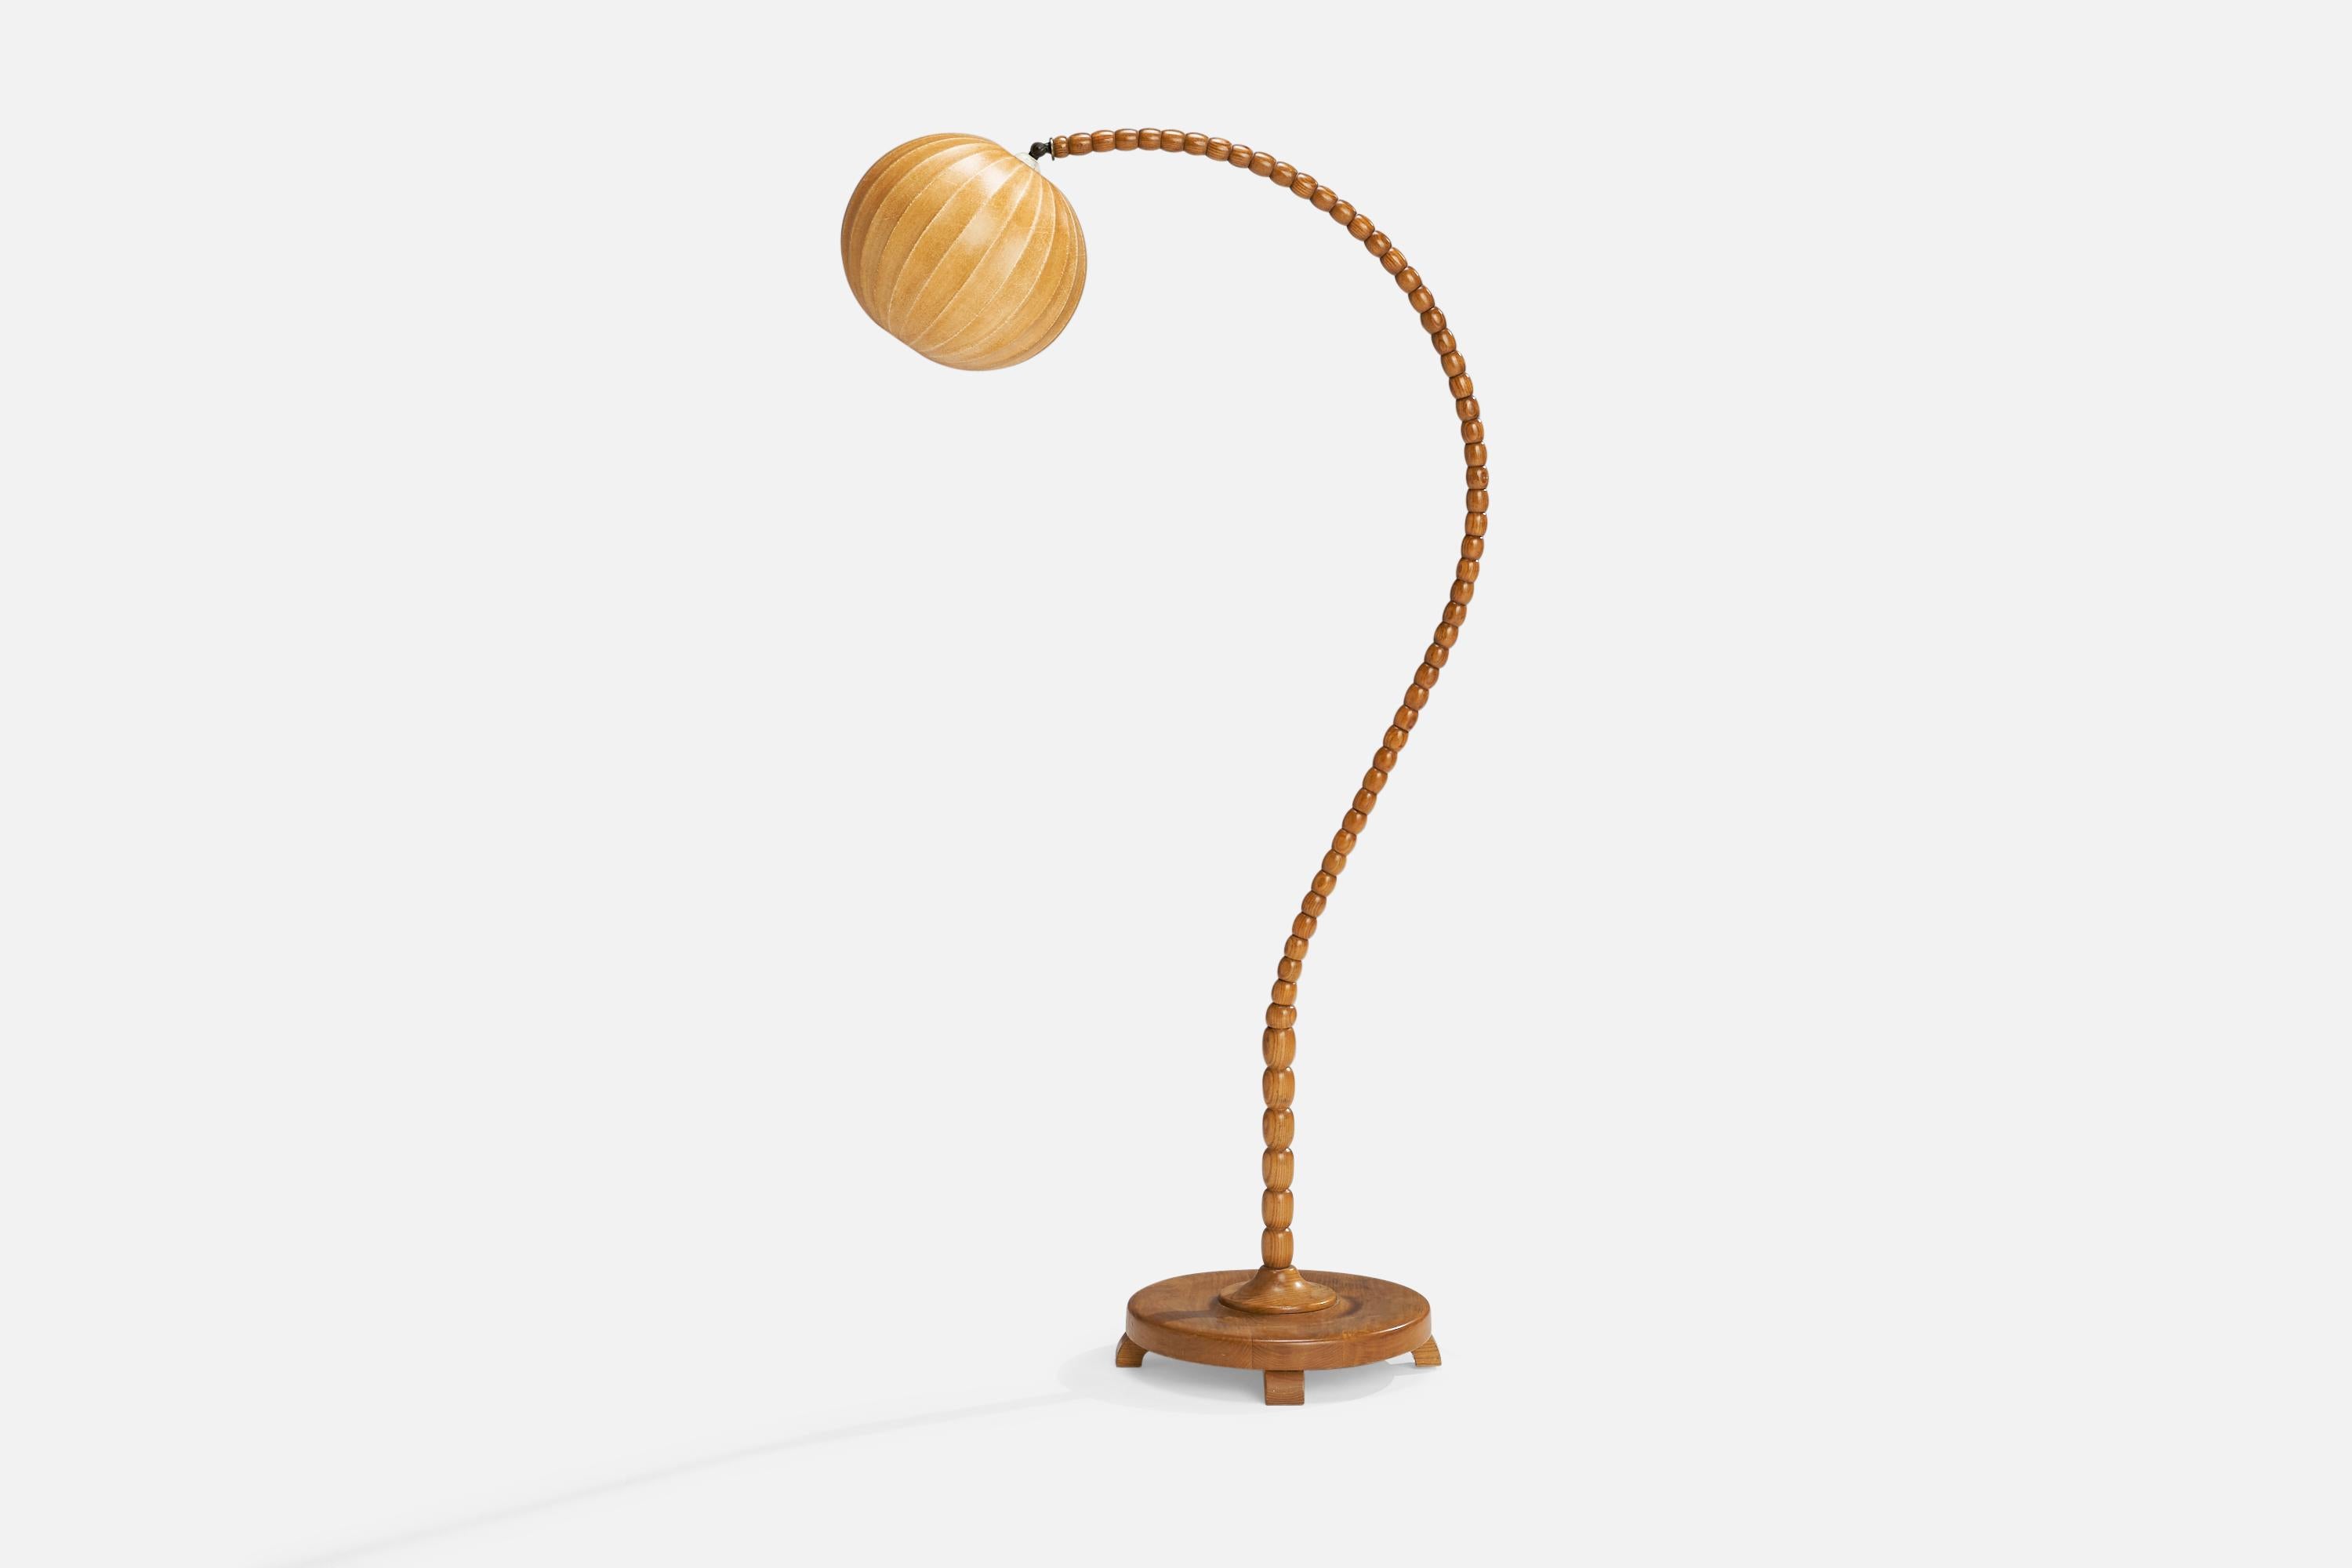 A pine and beige waxed cotton floor lamp designed and produced in Sweden, 1940s.

Overall Dimensions (inches): 59.5” H x 10.5” W x 29” D
Stated dimensions include shade.
Bulb Specifications: E-26 Bulb
Number of Sockets: 1
All lighting will be